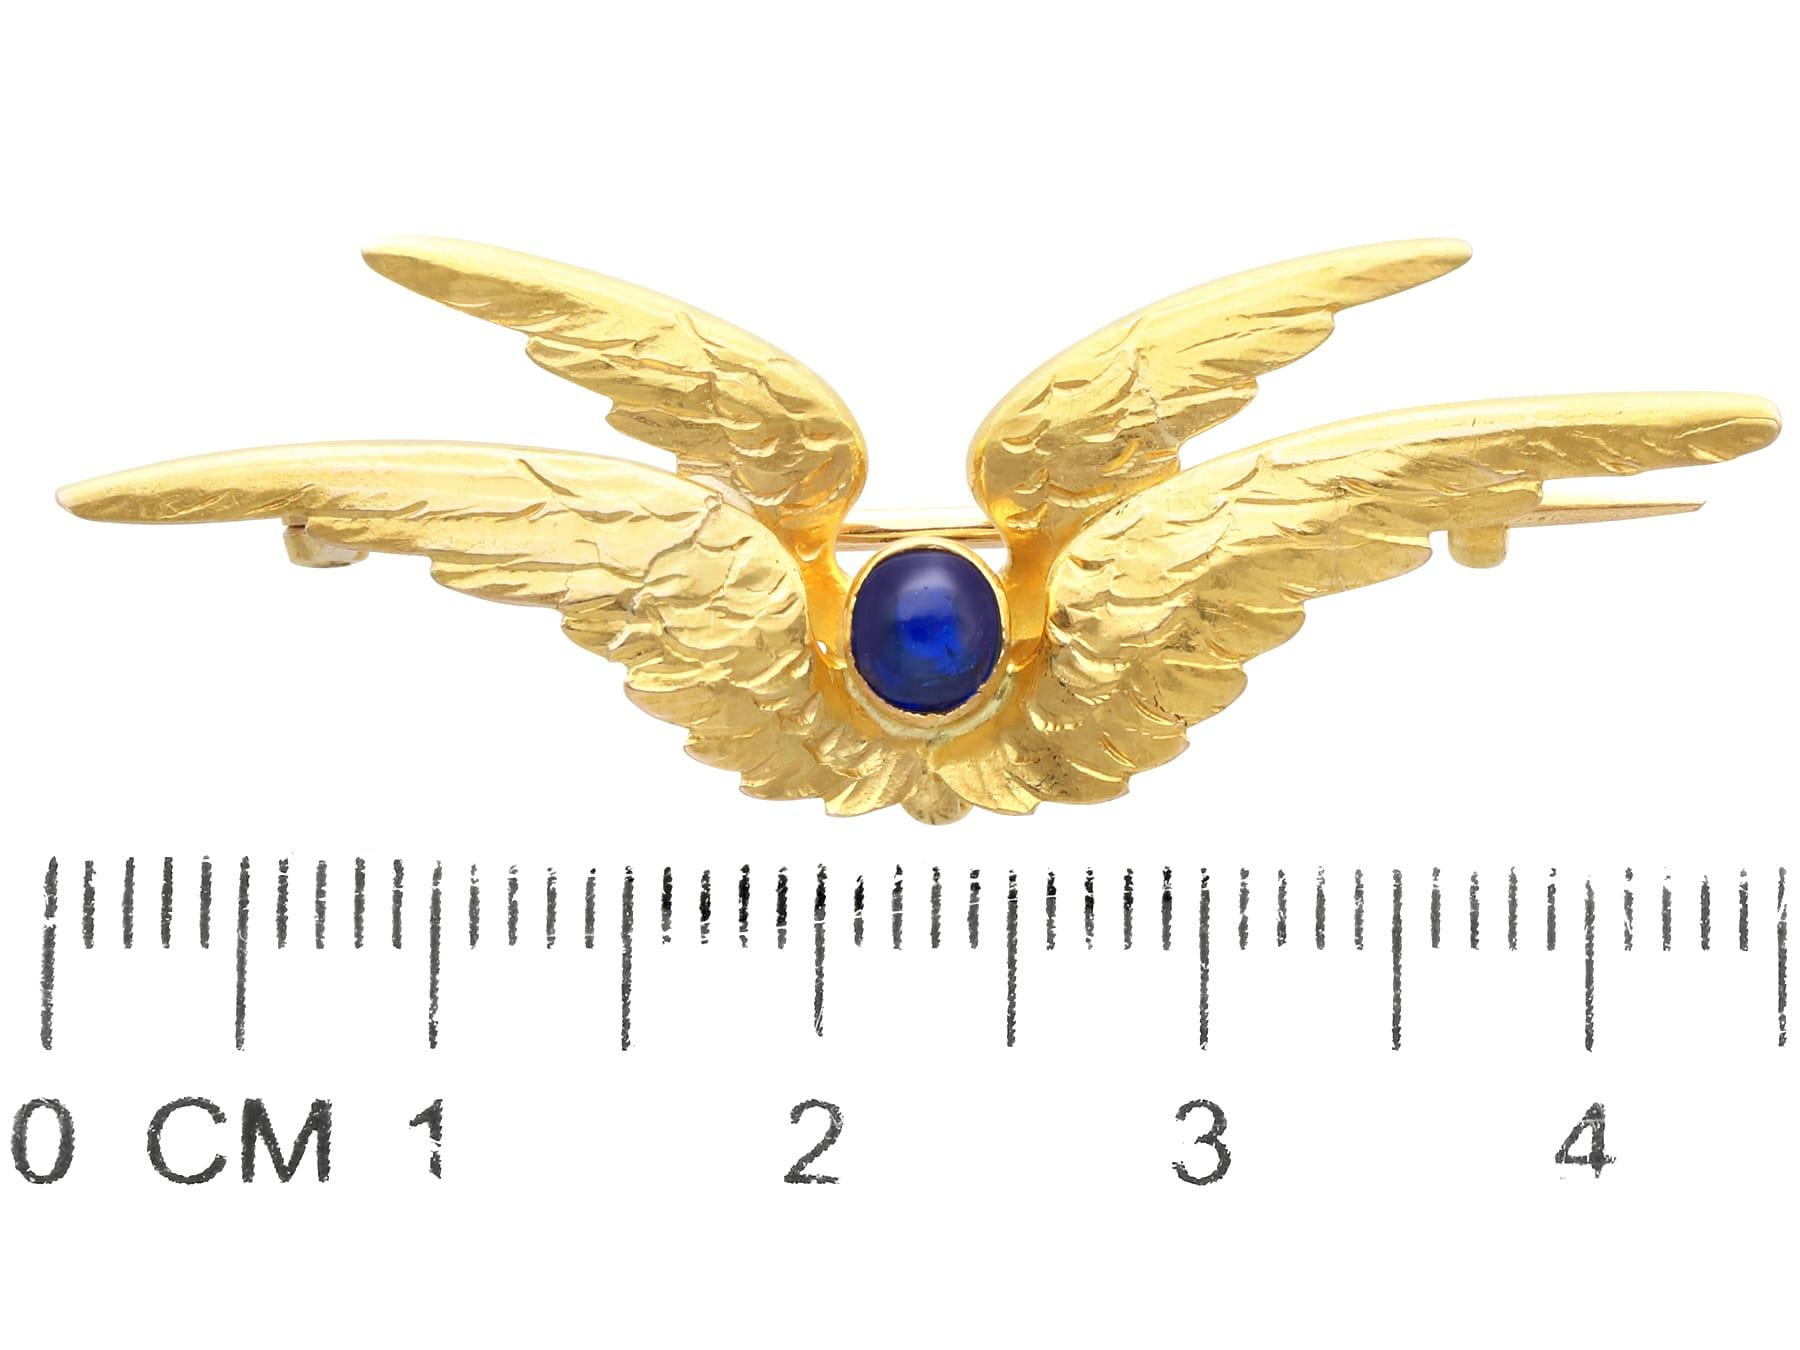 Antique 0.26 Carat Sapphire and 21k Yellow Gold Sweetheart Brooch, circa 1900 1